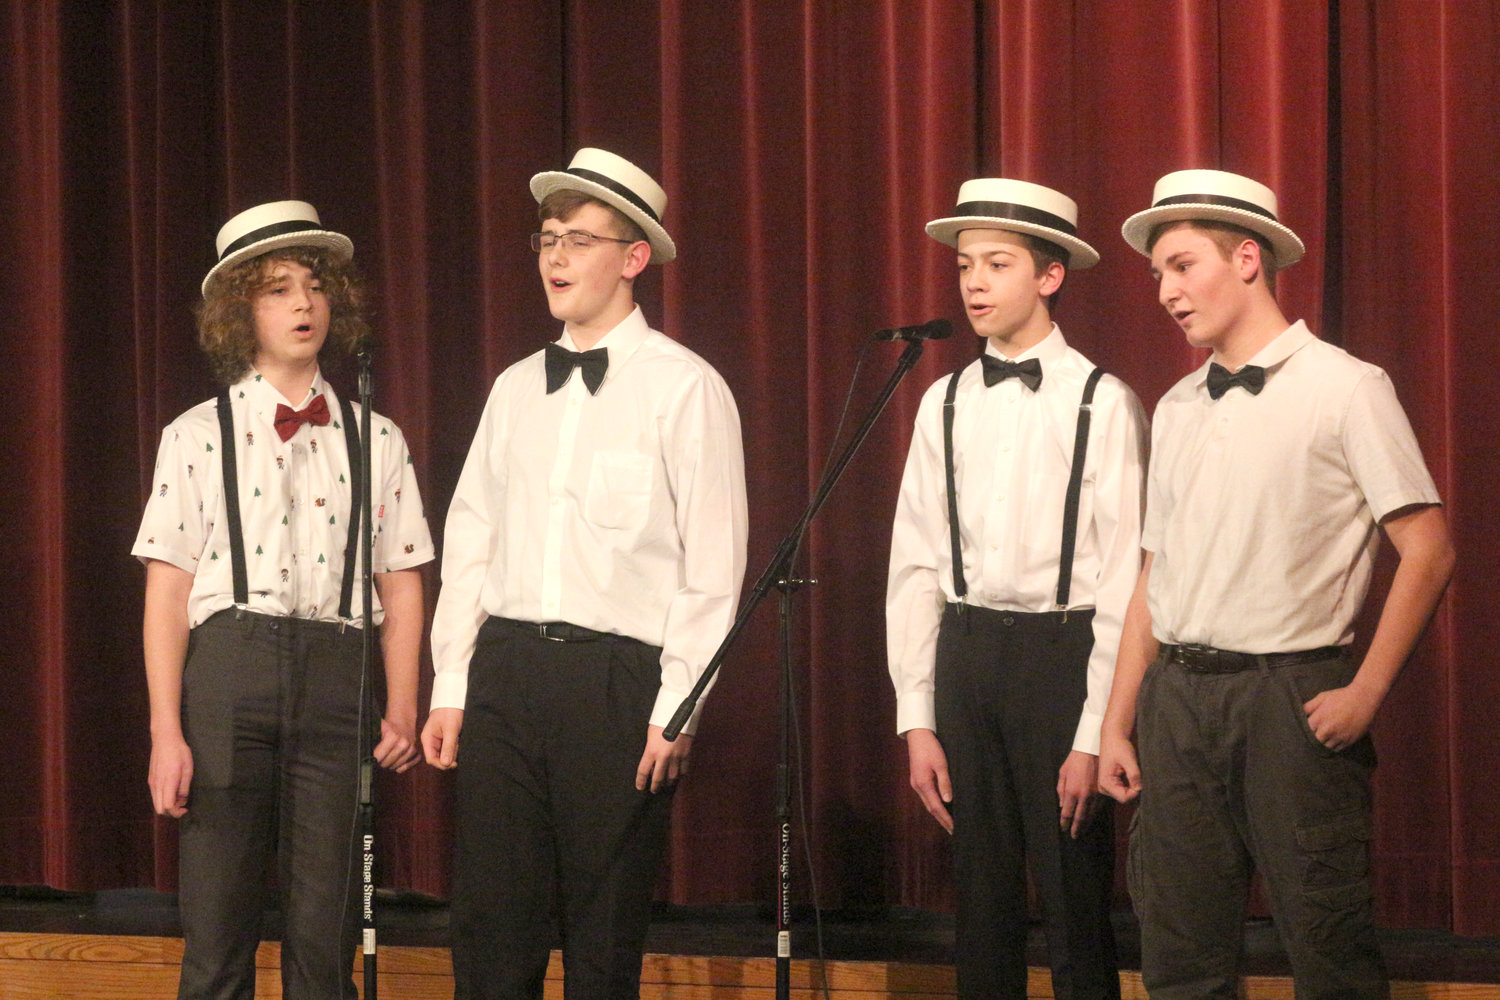 The barbershop quartet of (from left) Jarrett TeBockhorst, Henry Yoder, Hayden Bailey and Jack Greiner sing “Baby on Board" at the Mid-Prairie Middle School choral concert on Tuesday, Feb. 25.